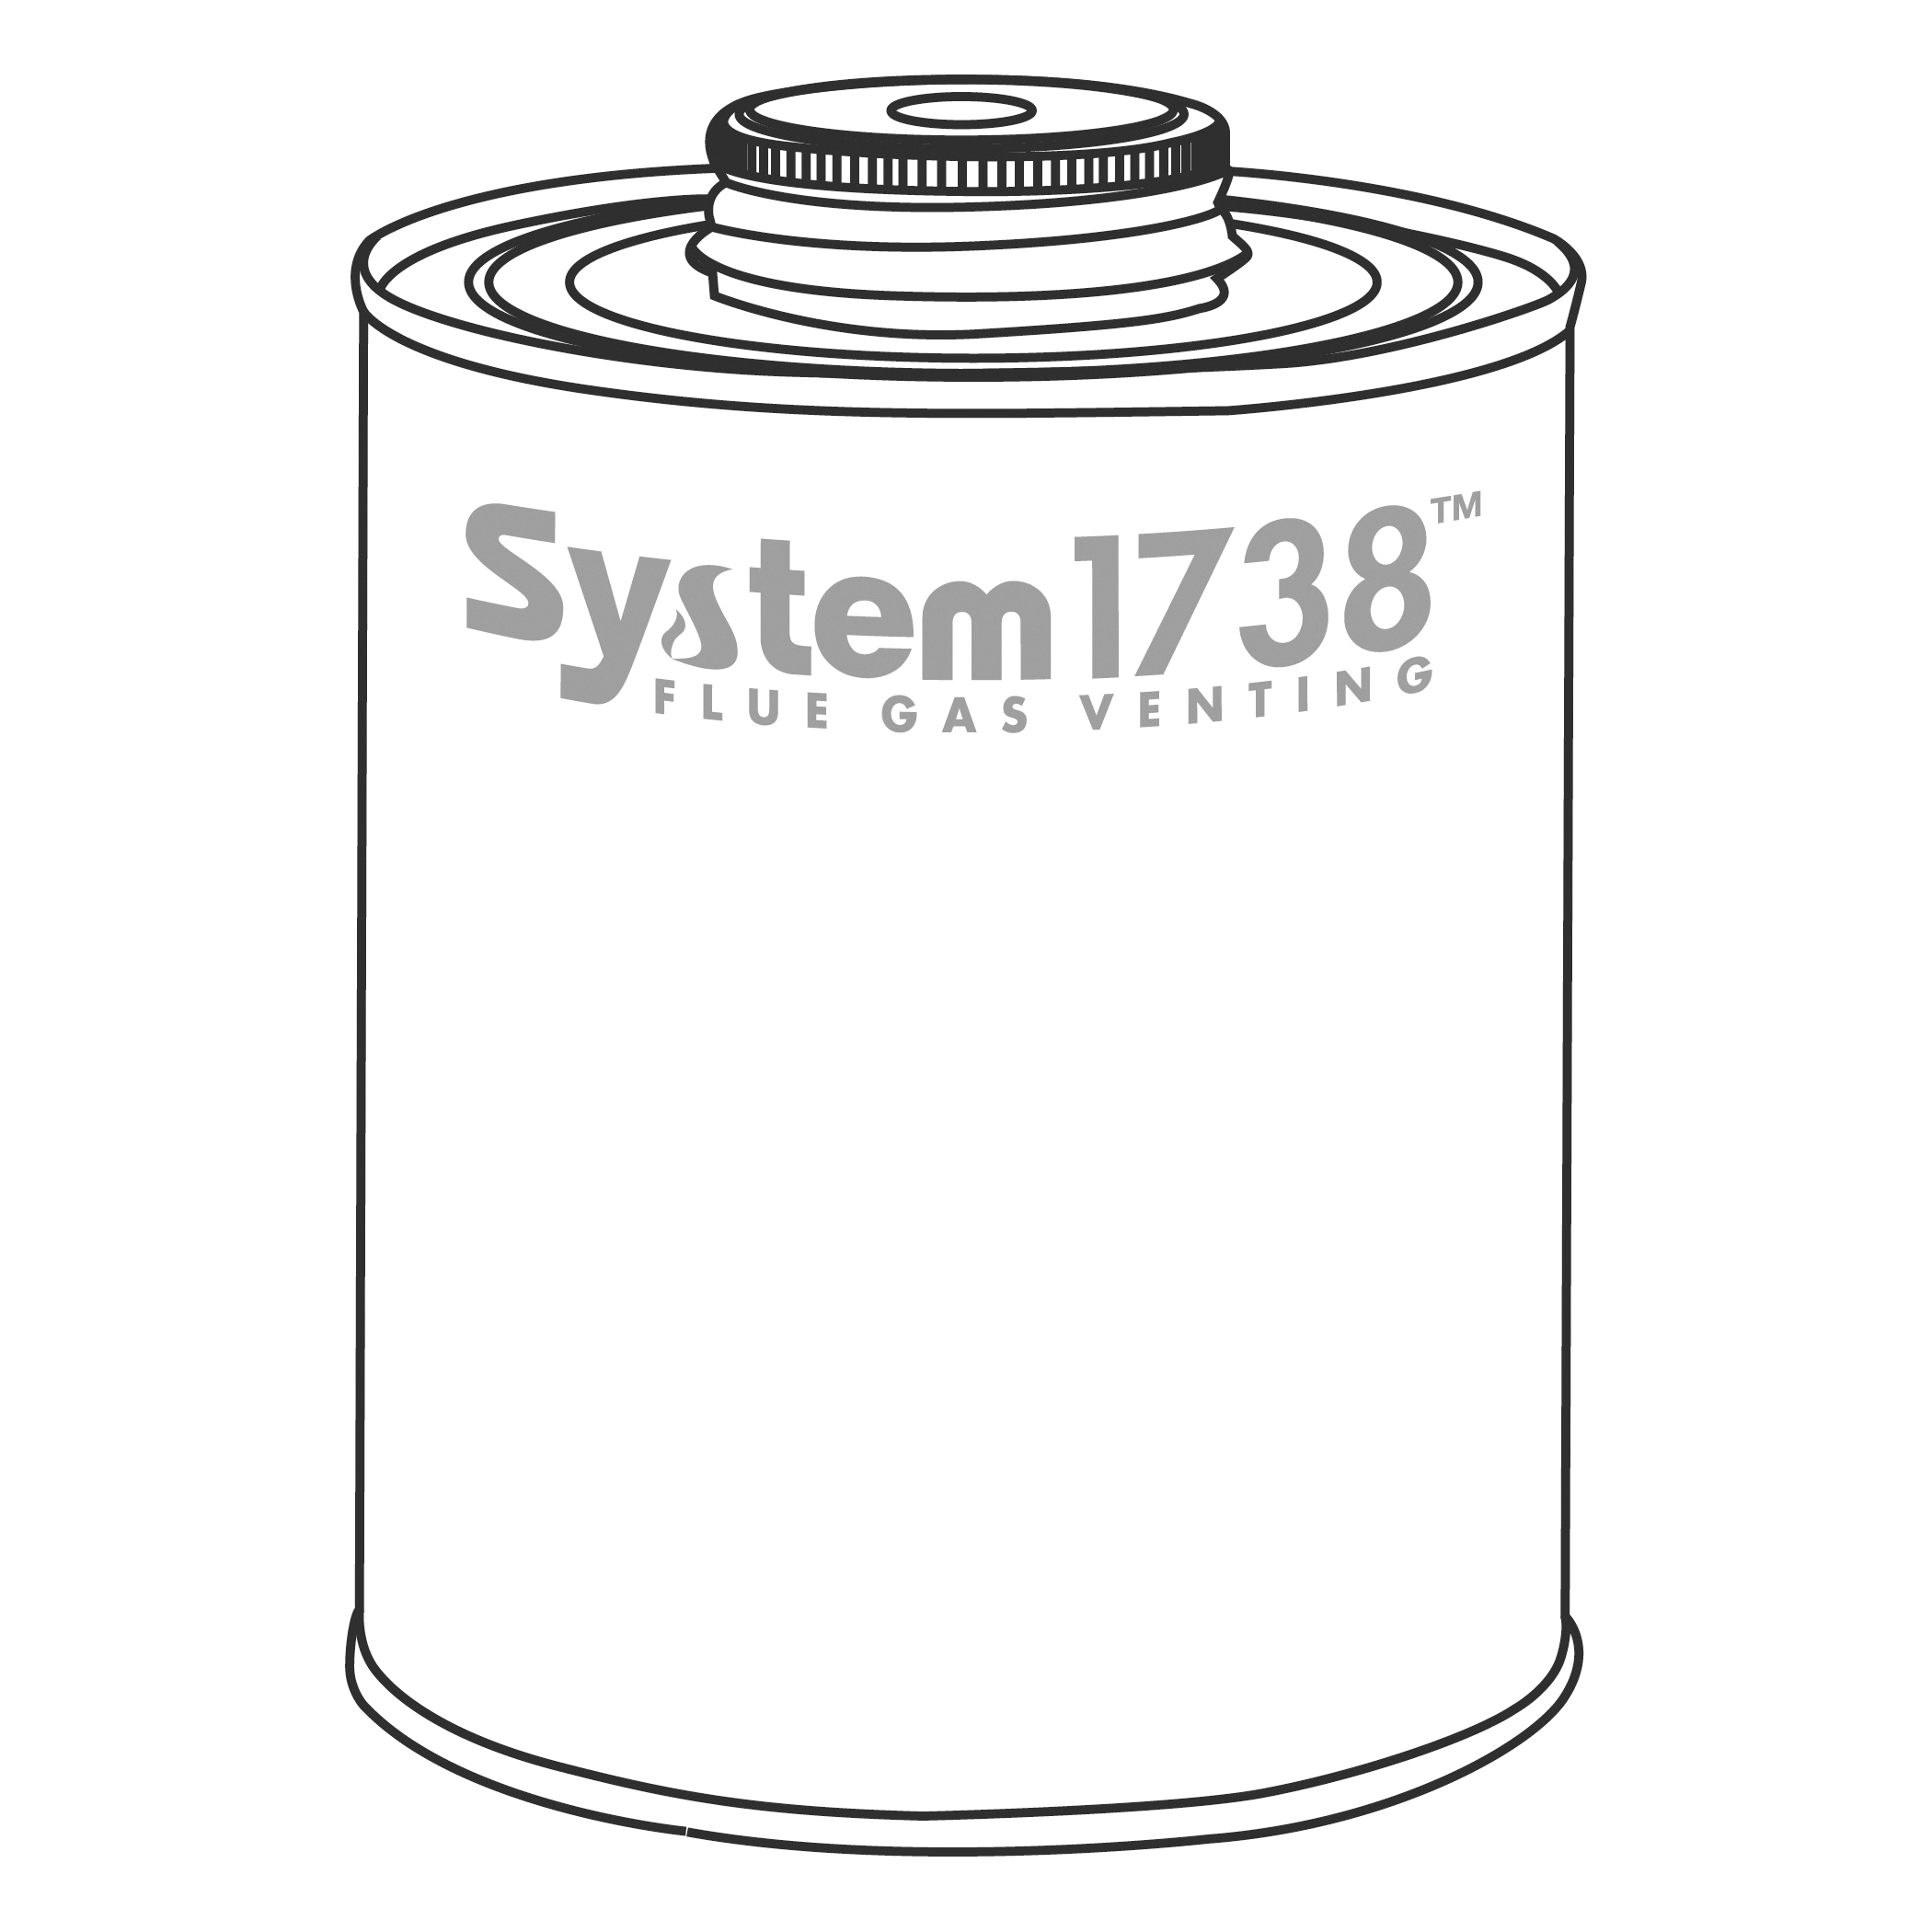 System 1738® 397040 Low VOC Medium Bodied FGV Cement, 1 pt, Auburn, For Use With PVC Plastic Pipe